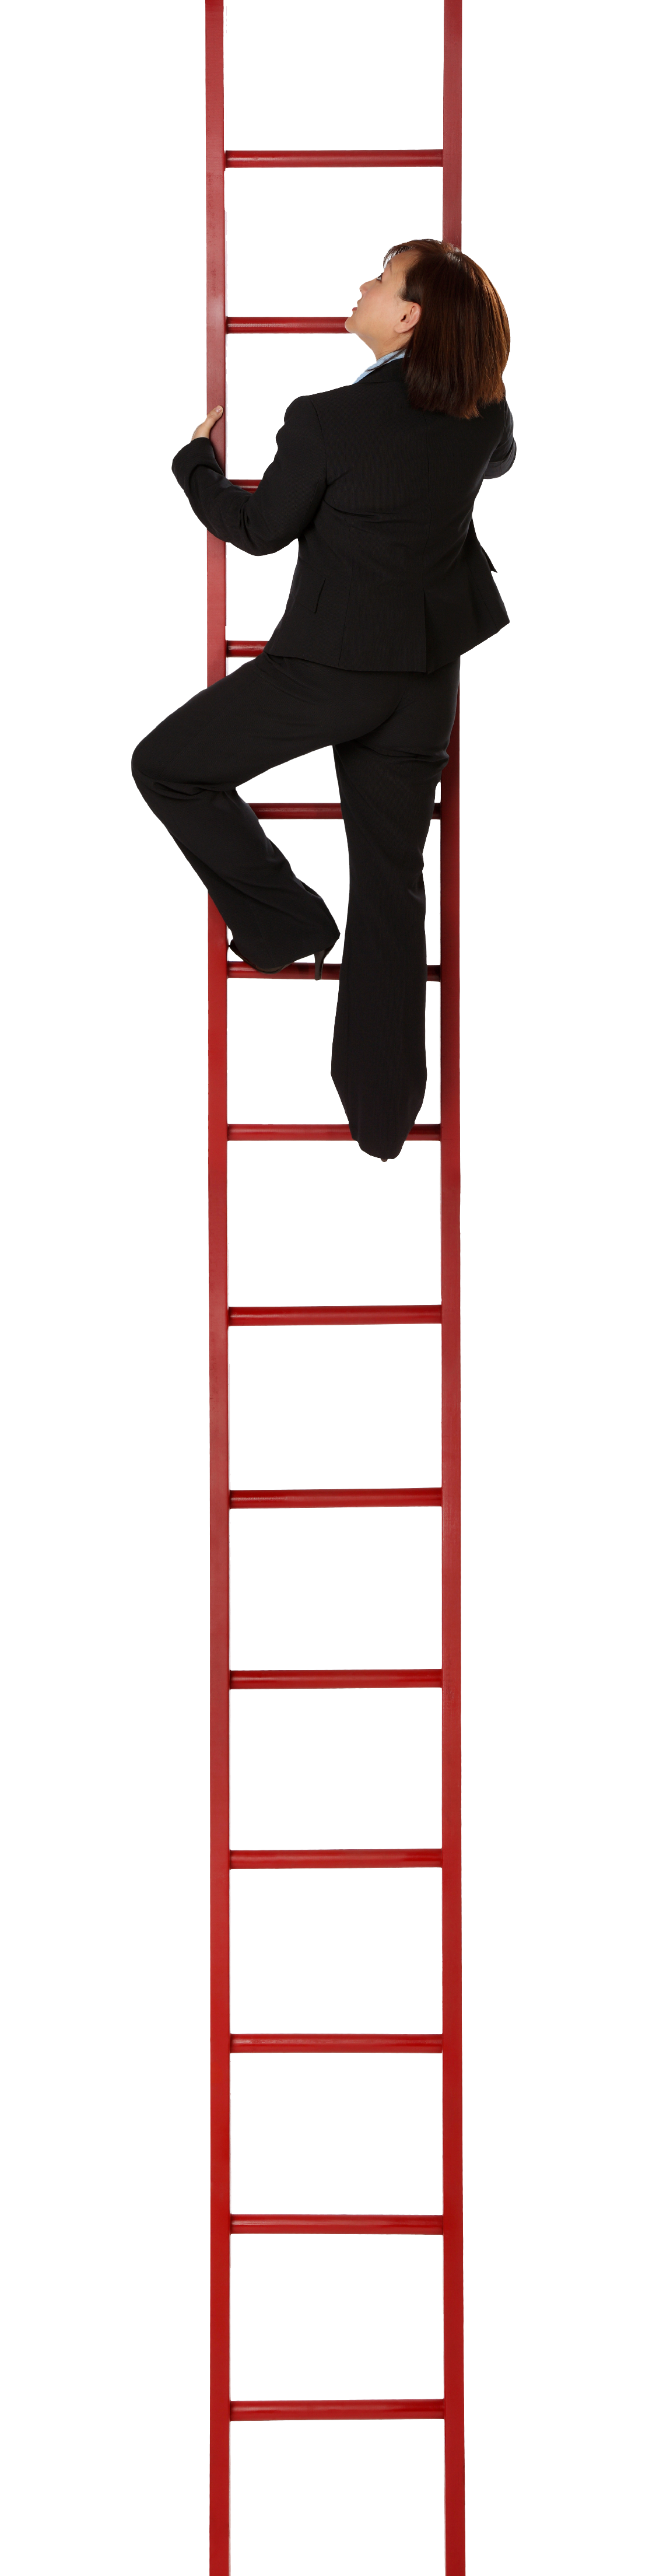 Ladder Picture Free HQ Image PNG Image